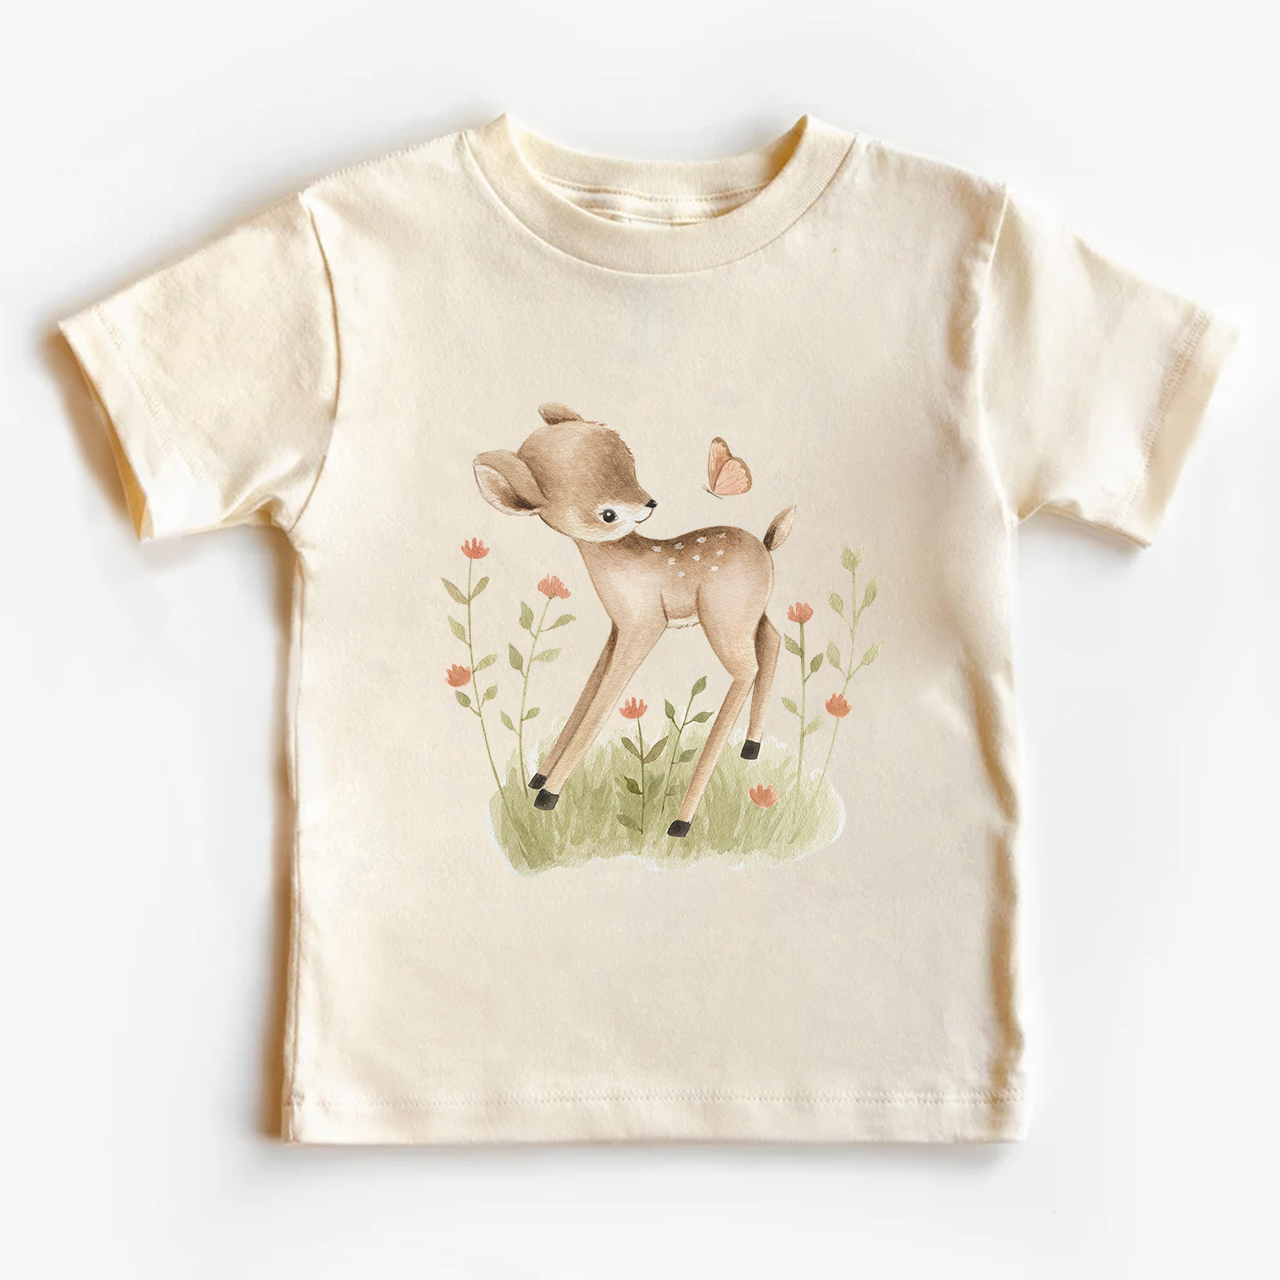 Deer And Butterfly Shirt For Kids